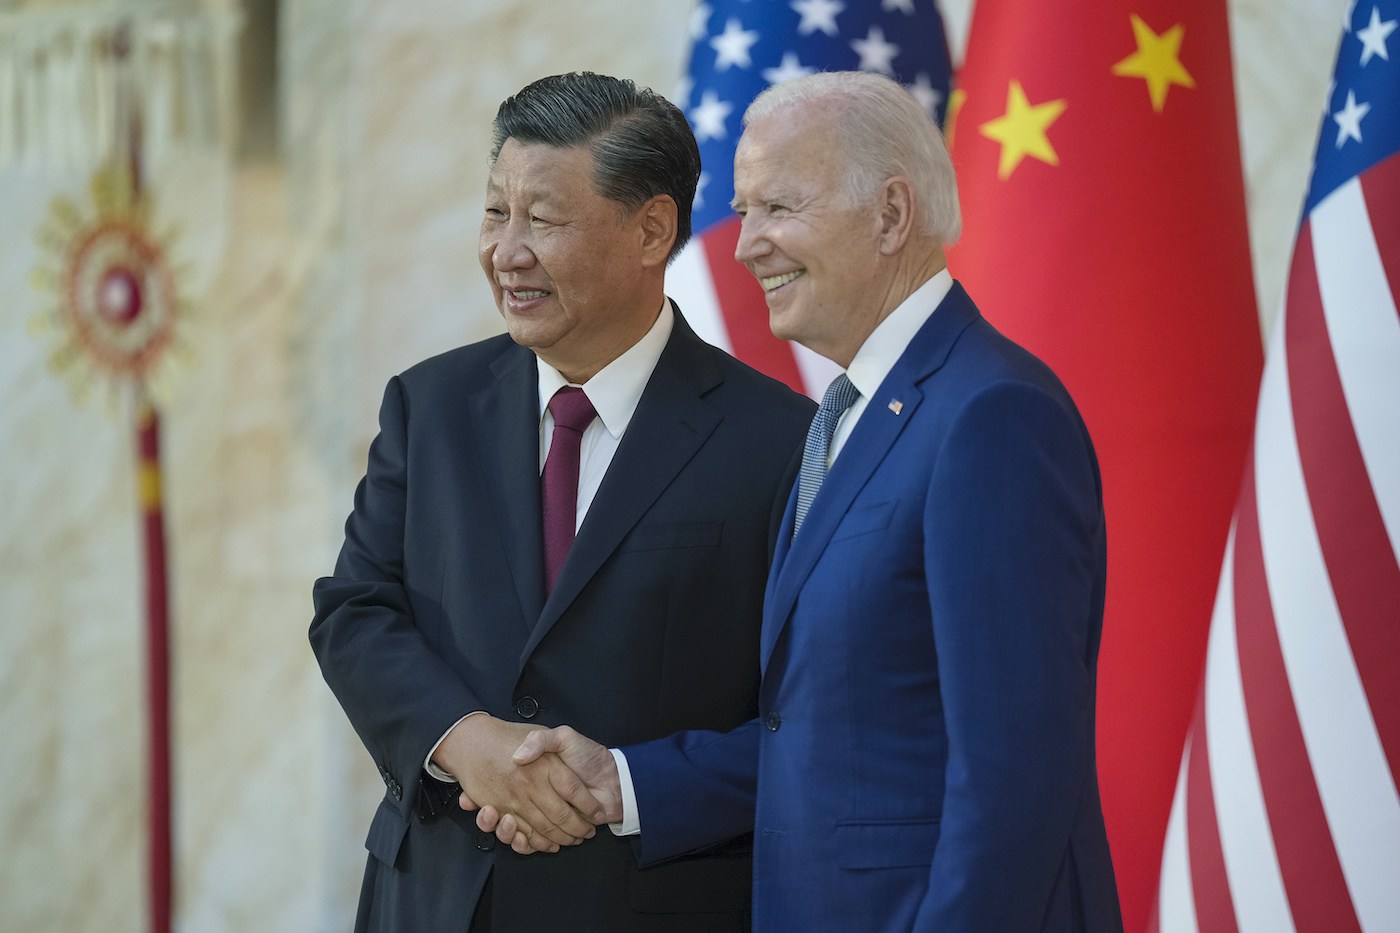 How will America change with Biden’s Digital Dollar? A glimpse at Communist China.